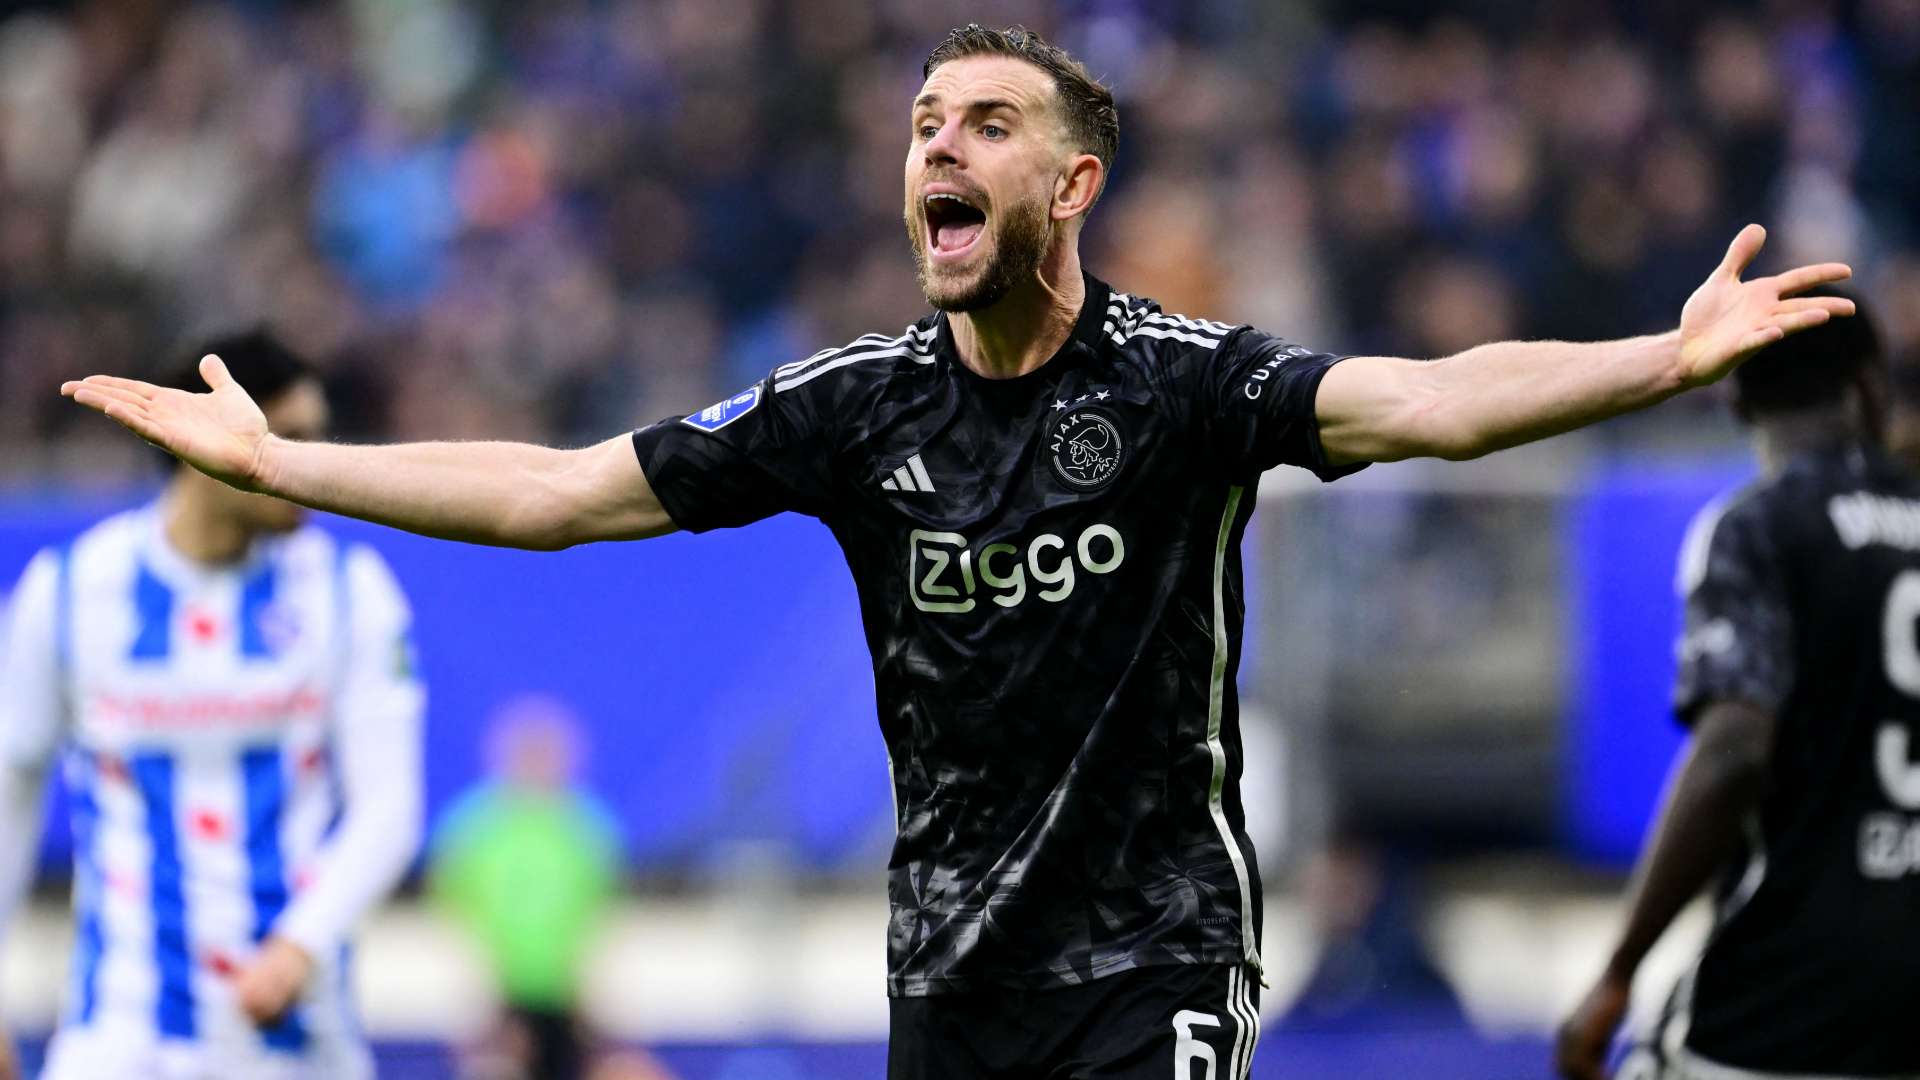 Cannot tolerate such a violation of law' - Huge embarrassment for Jordan Henderson's Ajax as they're shockingly forced to suspend CEO Alex Kroes just two weeks into his new job | Goal.com